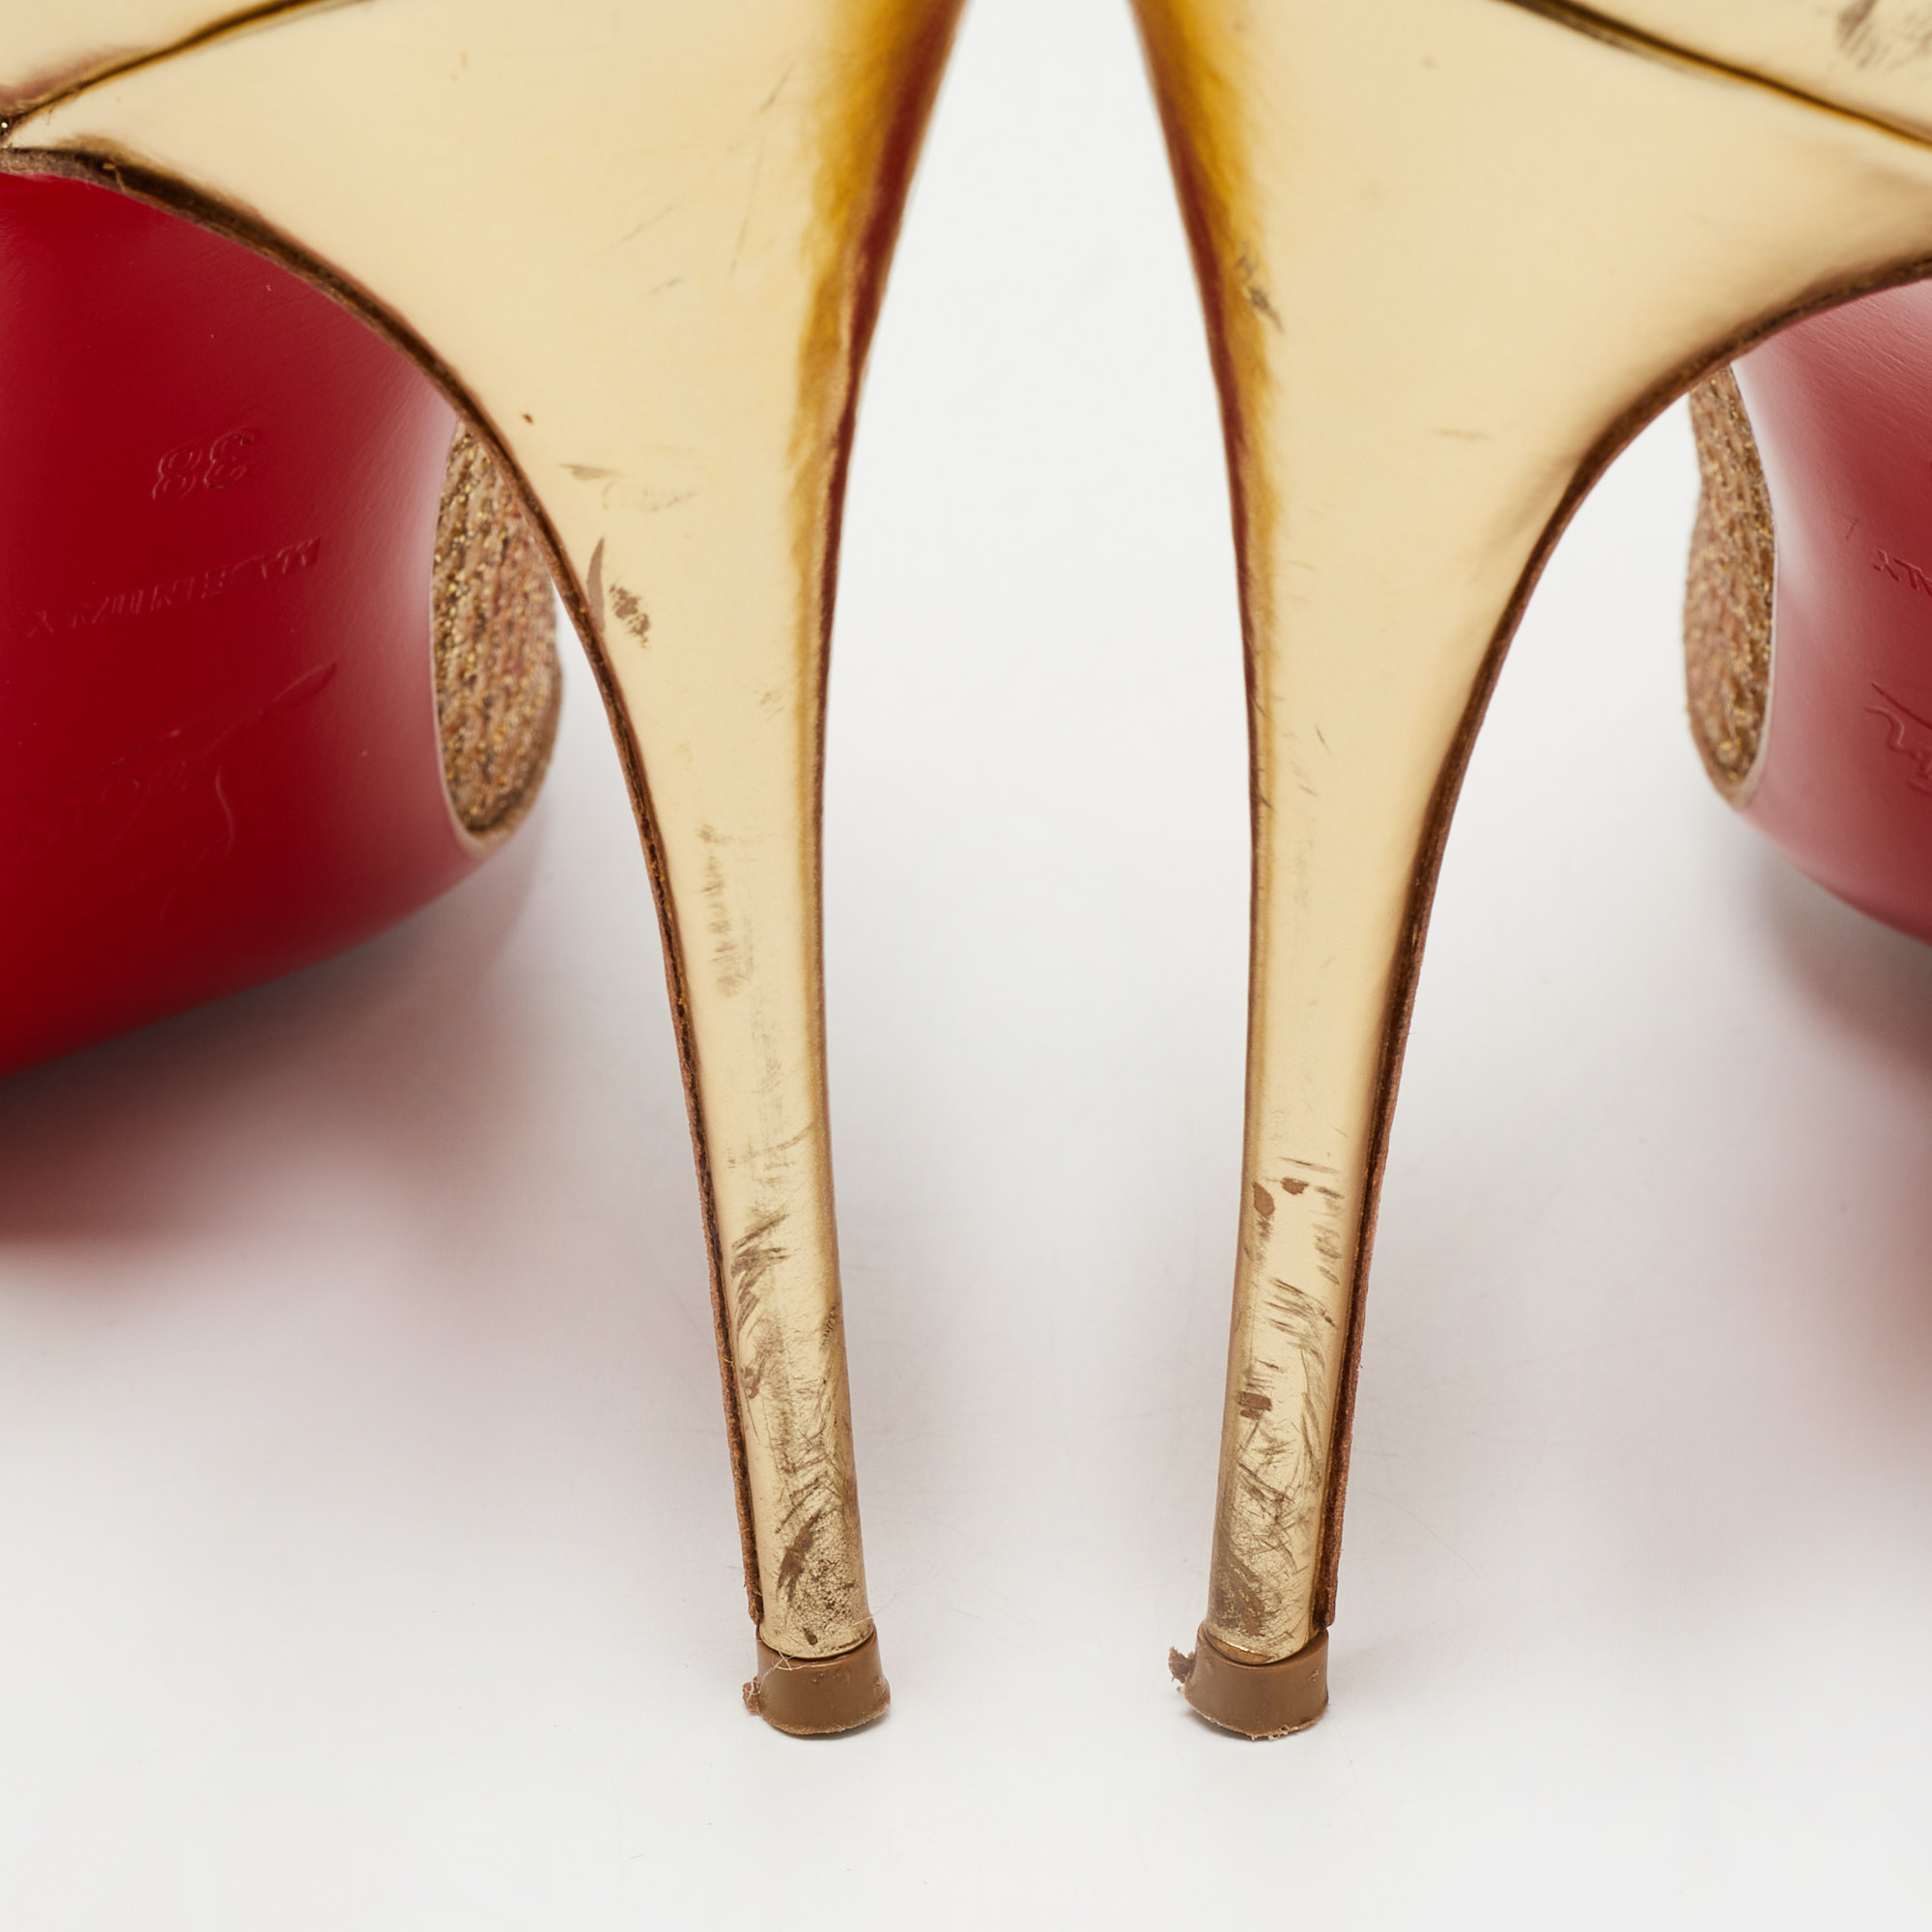 Christian Louboutin Gold Leather And Mesh Follies Resille Pumps Size 38